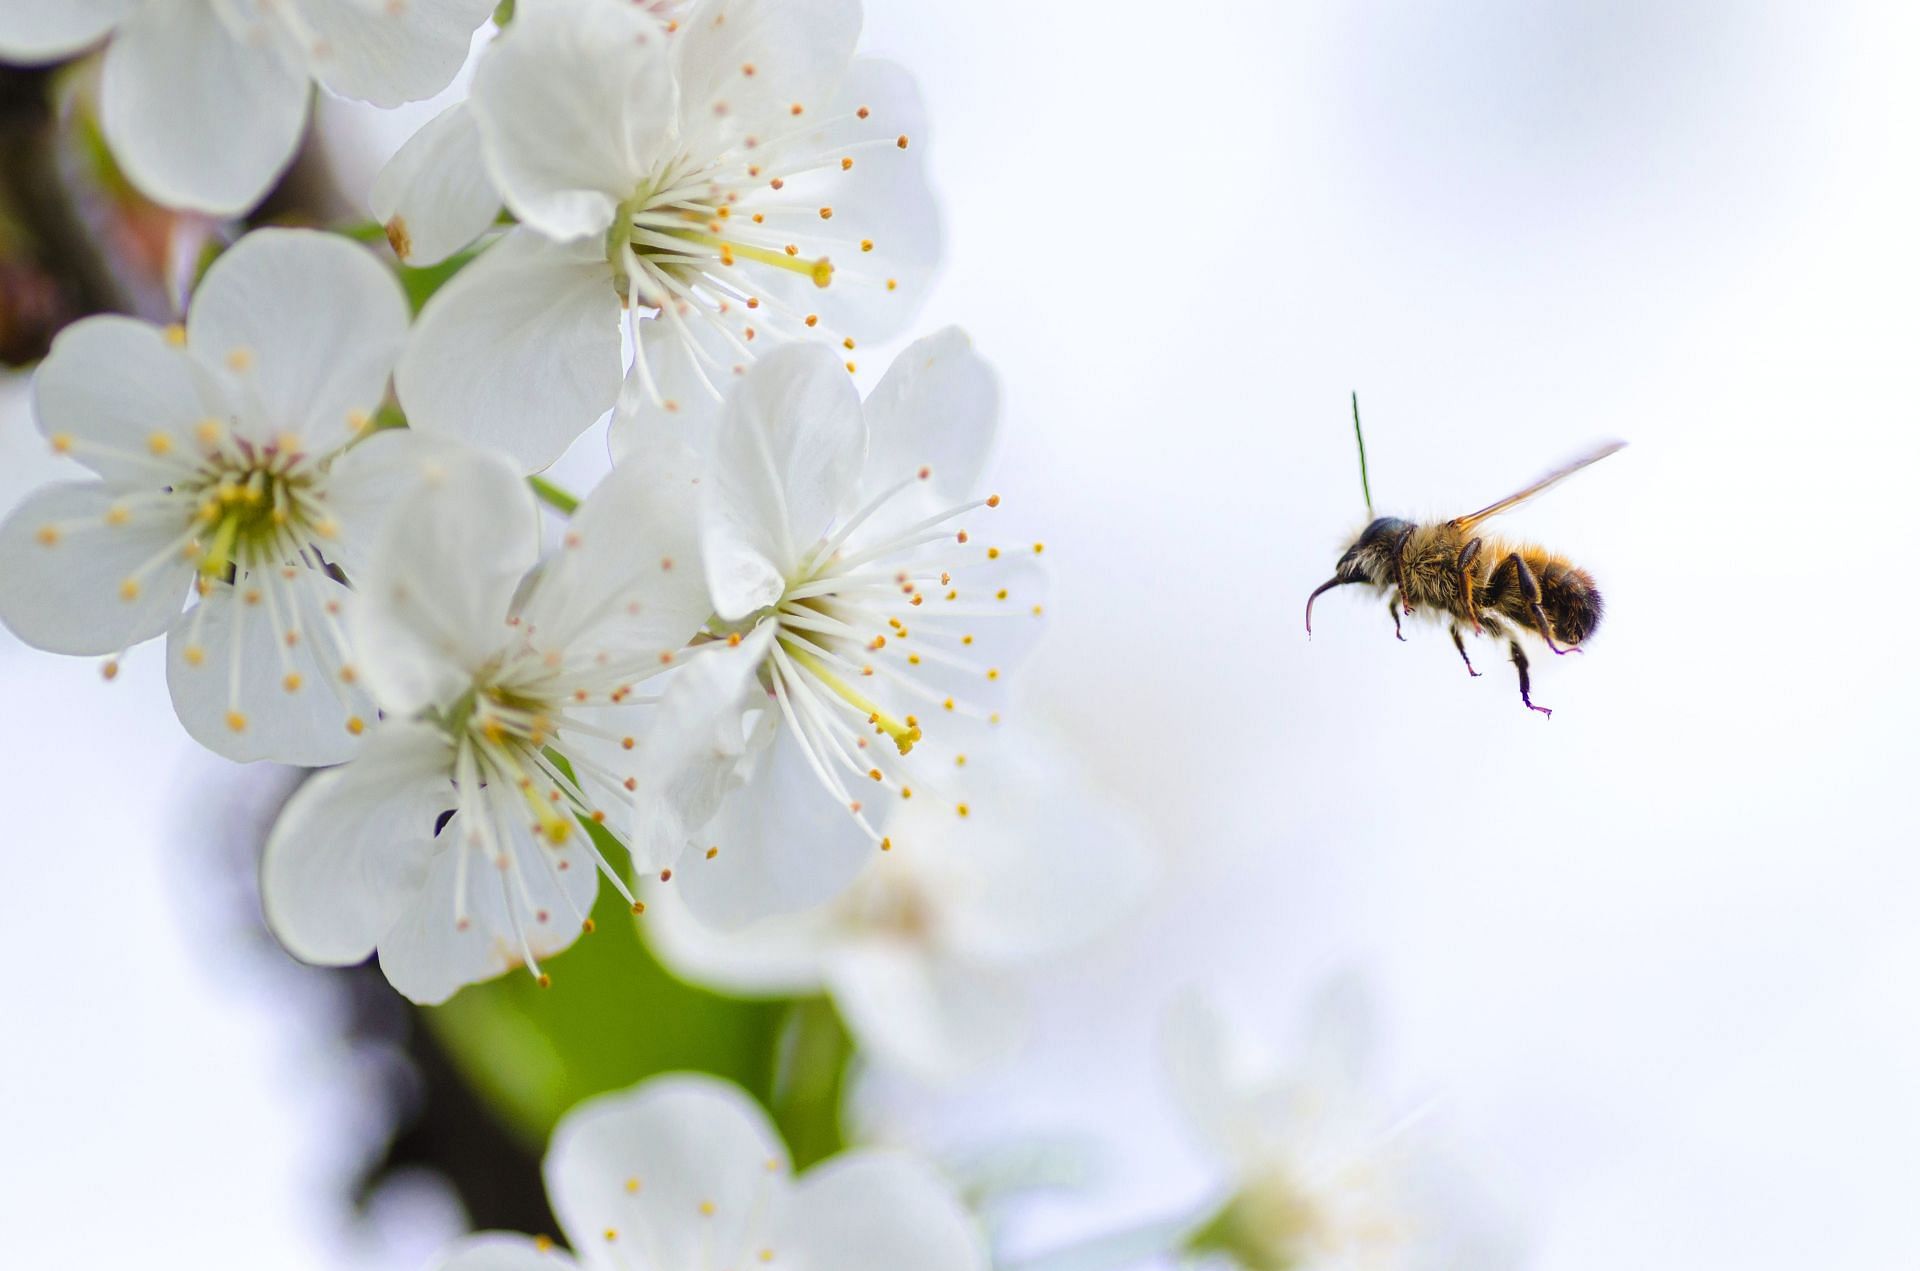 pine pollen benefits (image sourced via Pexels / Photo by lukas)